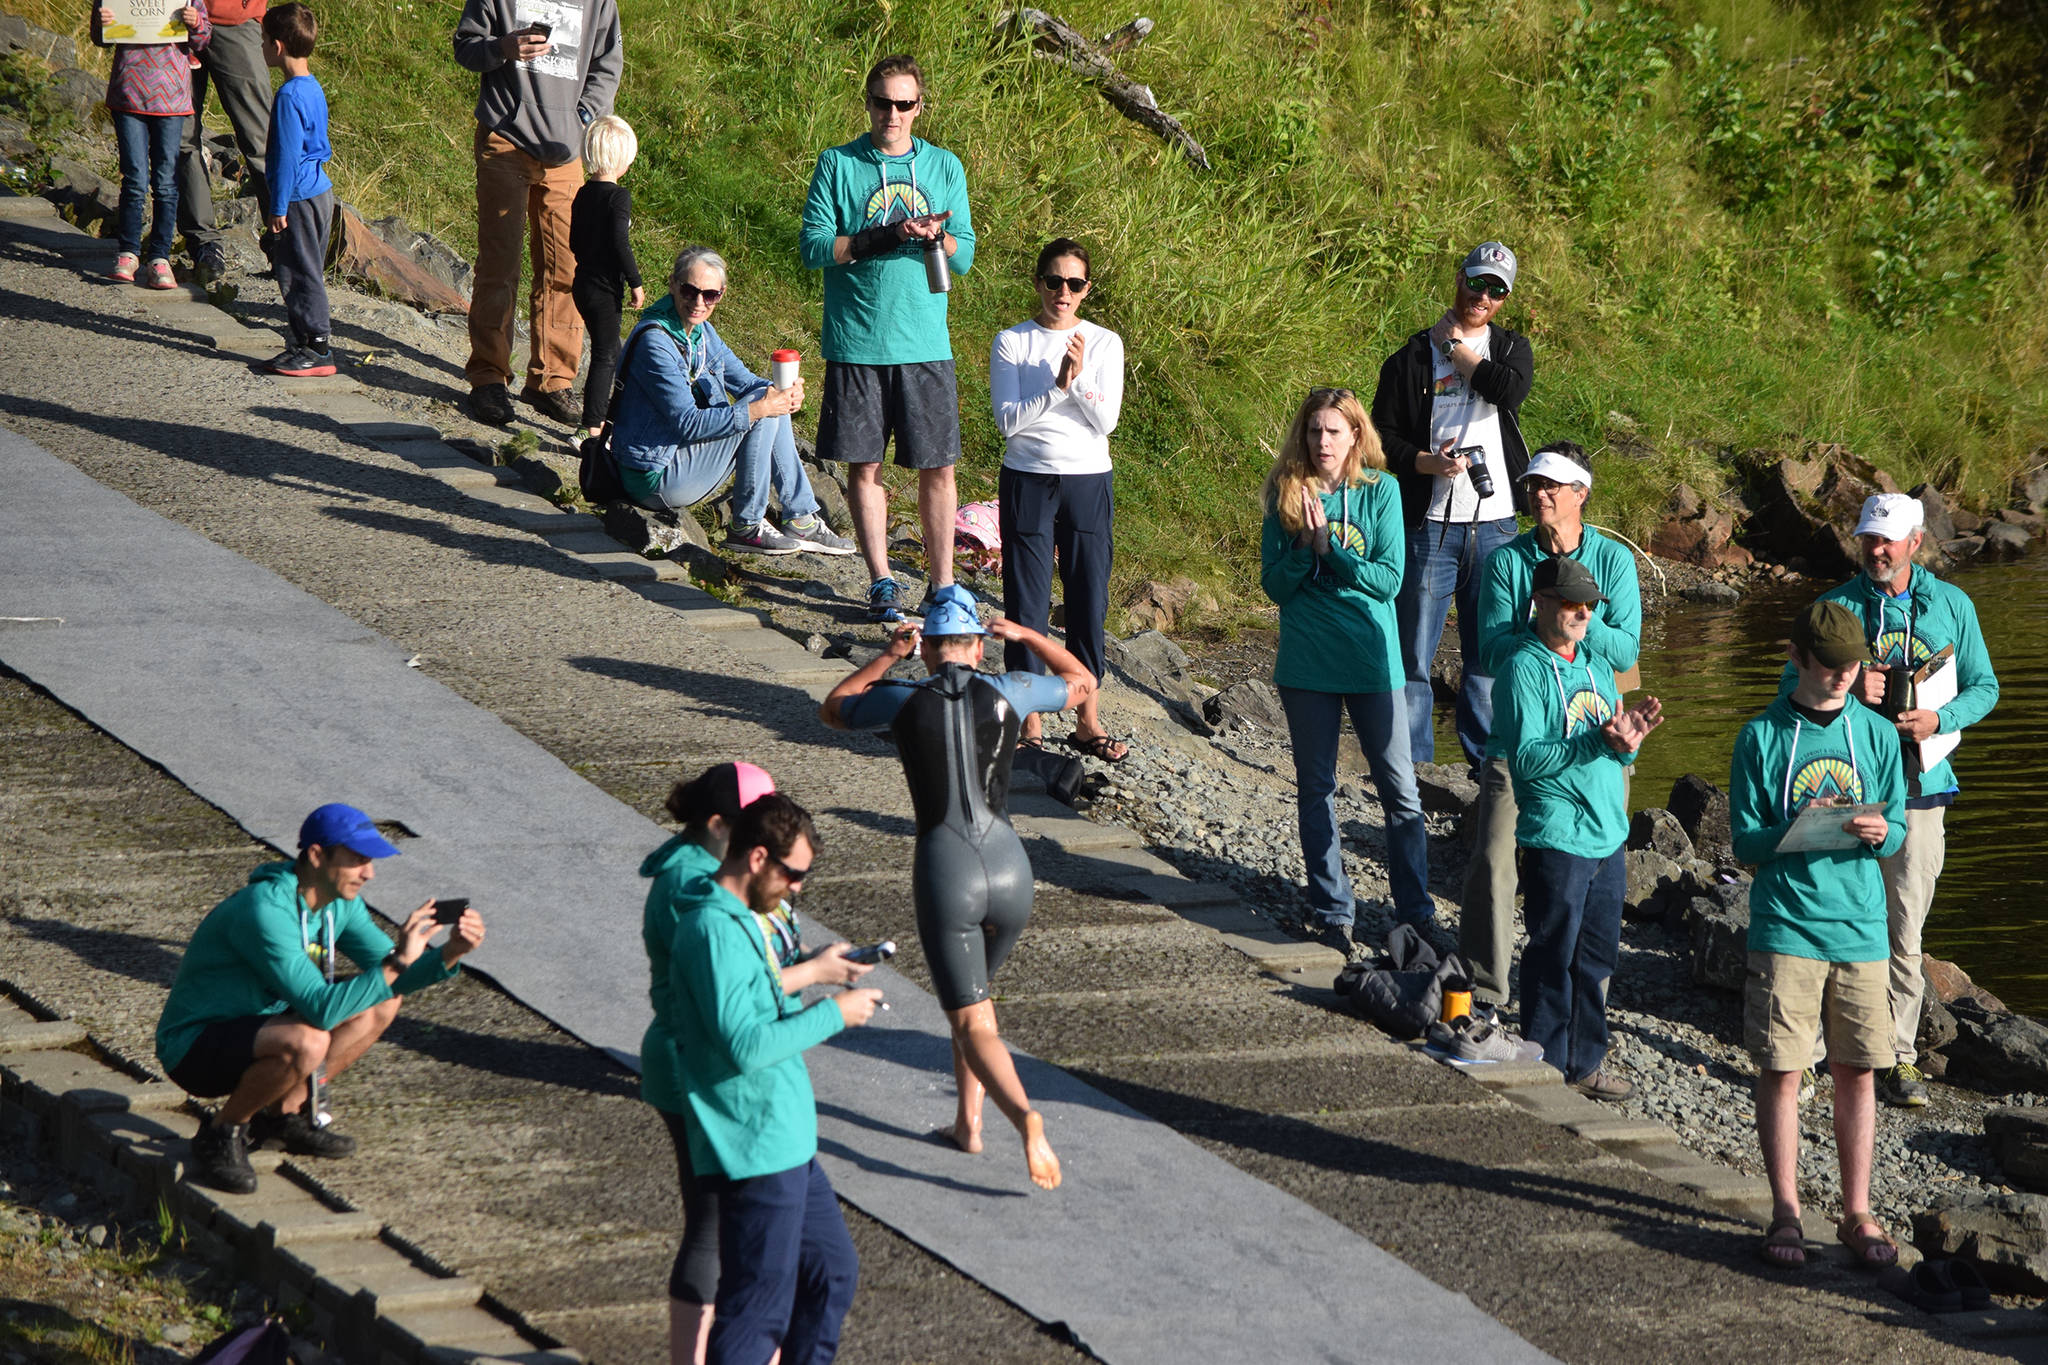 Aukeman Triathlon supporters cheer on a swimmer as they leave Auke Lake on Saturday, Aug. 3, 2019. (Nolin Ainsworth | Juneau Empire)